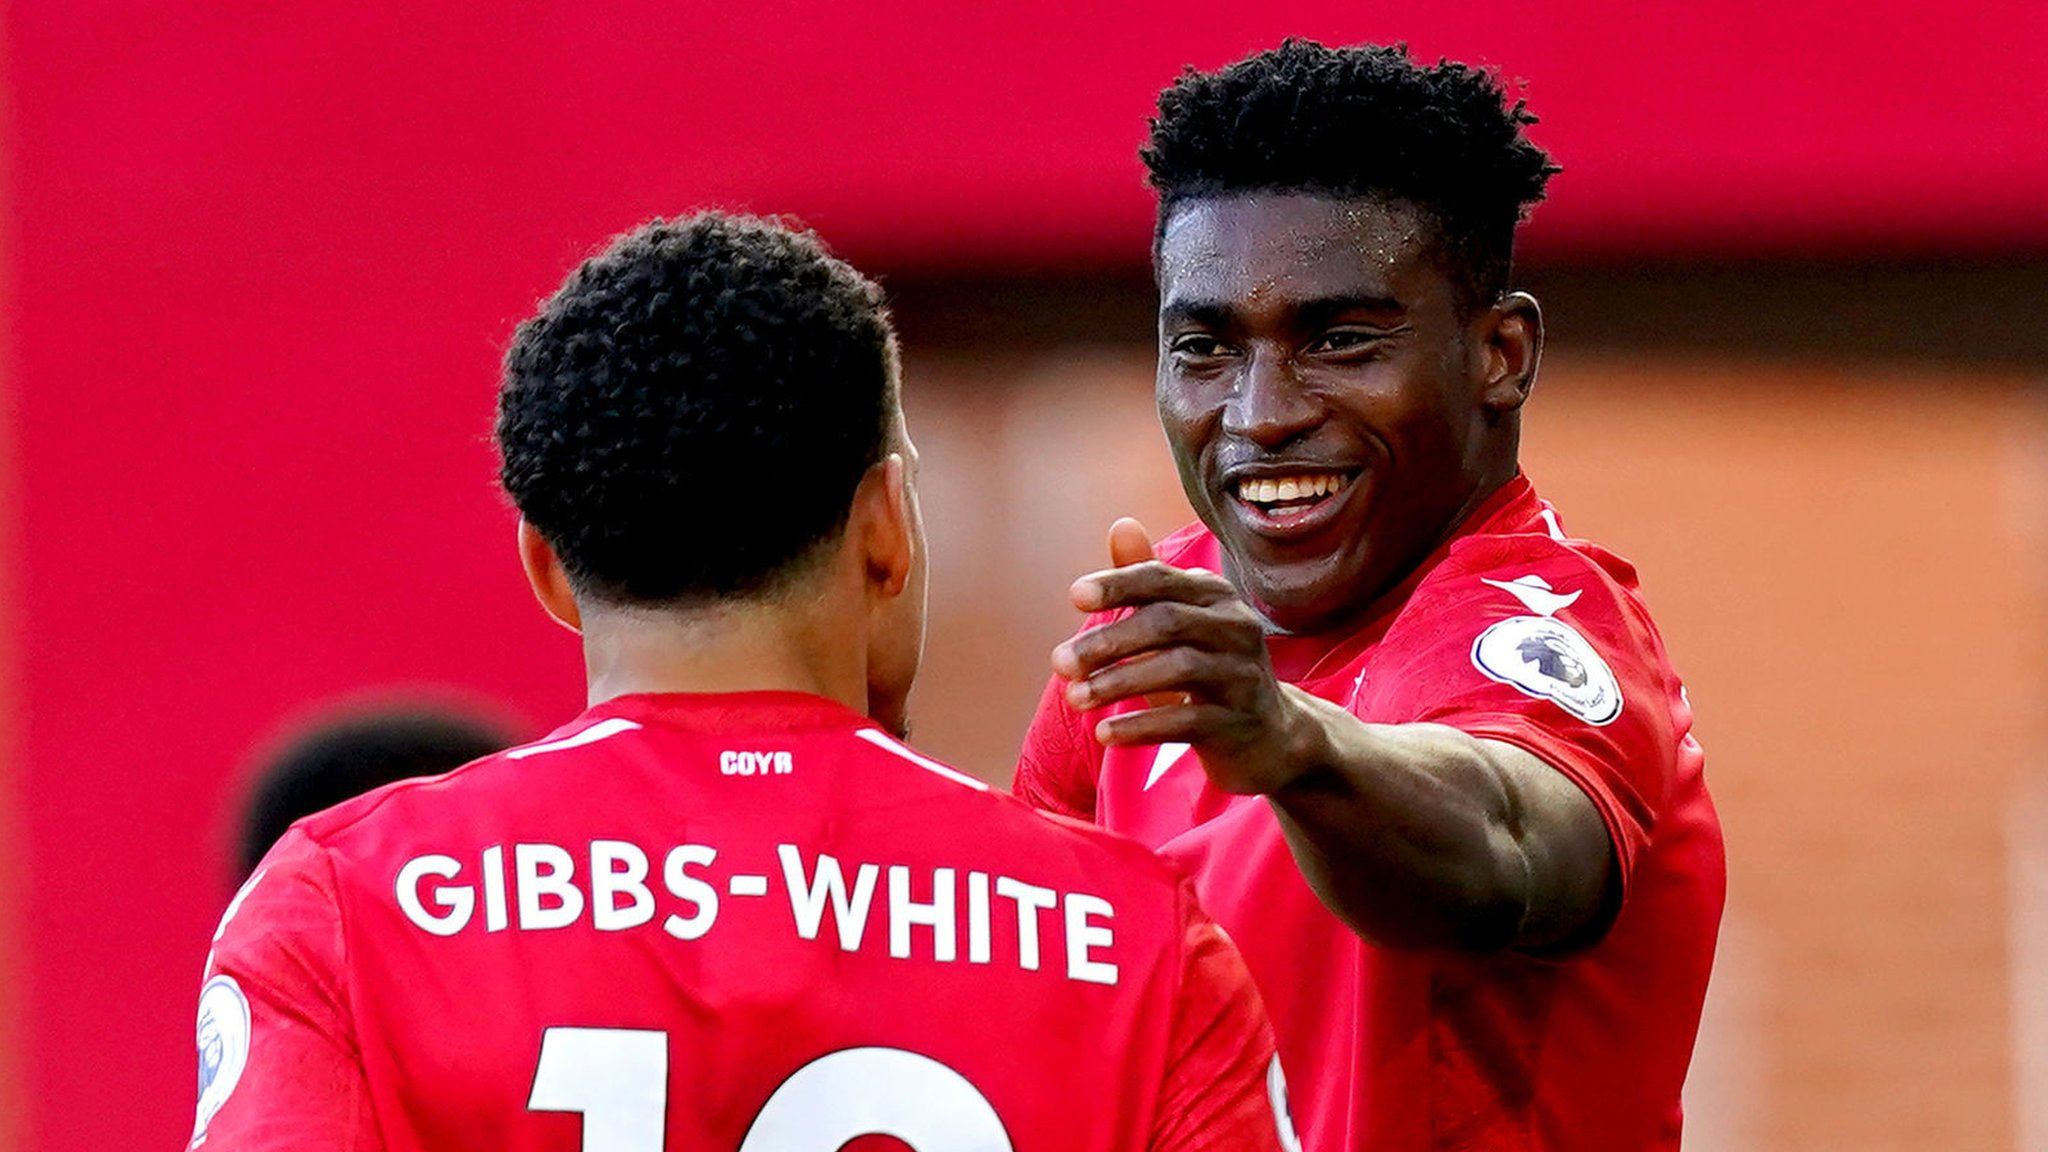 Nottingham Forest's Taiwo Awoniyi celebrates with team-mate Morgan Gibbs-White after scoring against Arsenal in the Premier League